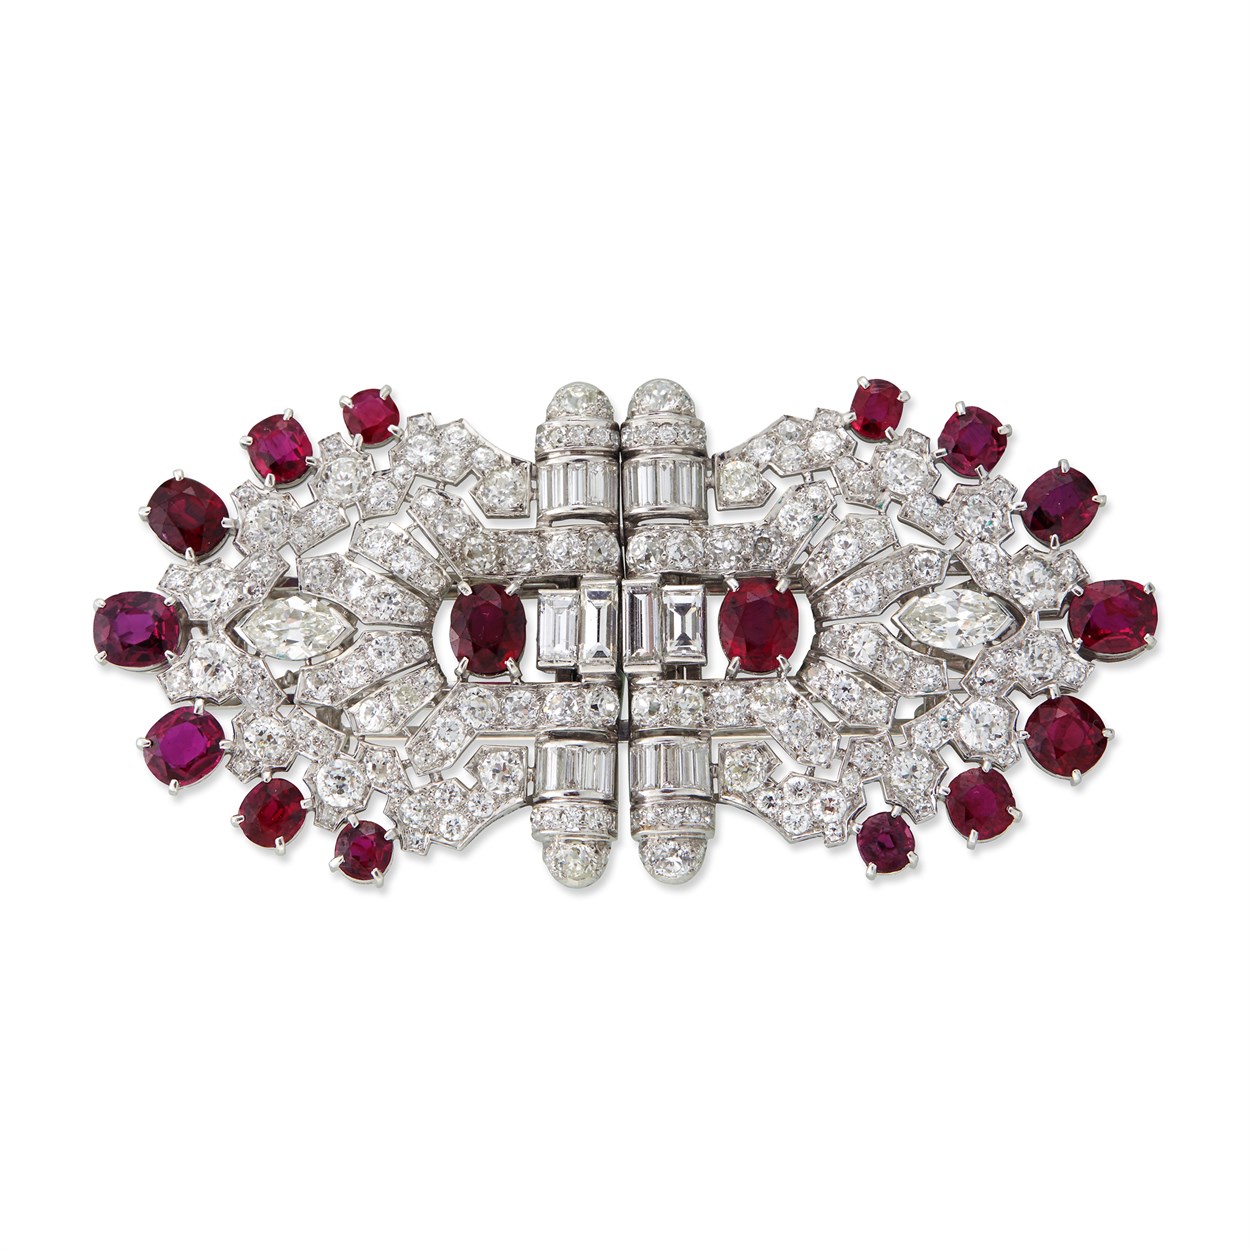 Lot 122 - A Pair of Art Deco Ruby, Diamond, and Platinum Dress Clips